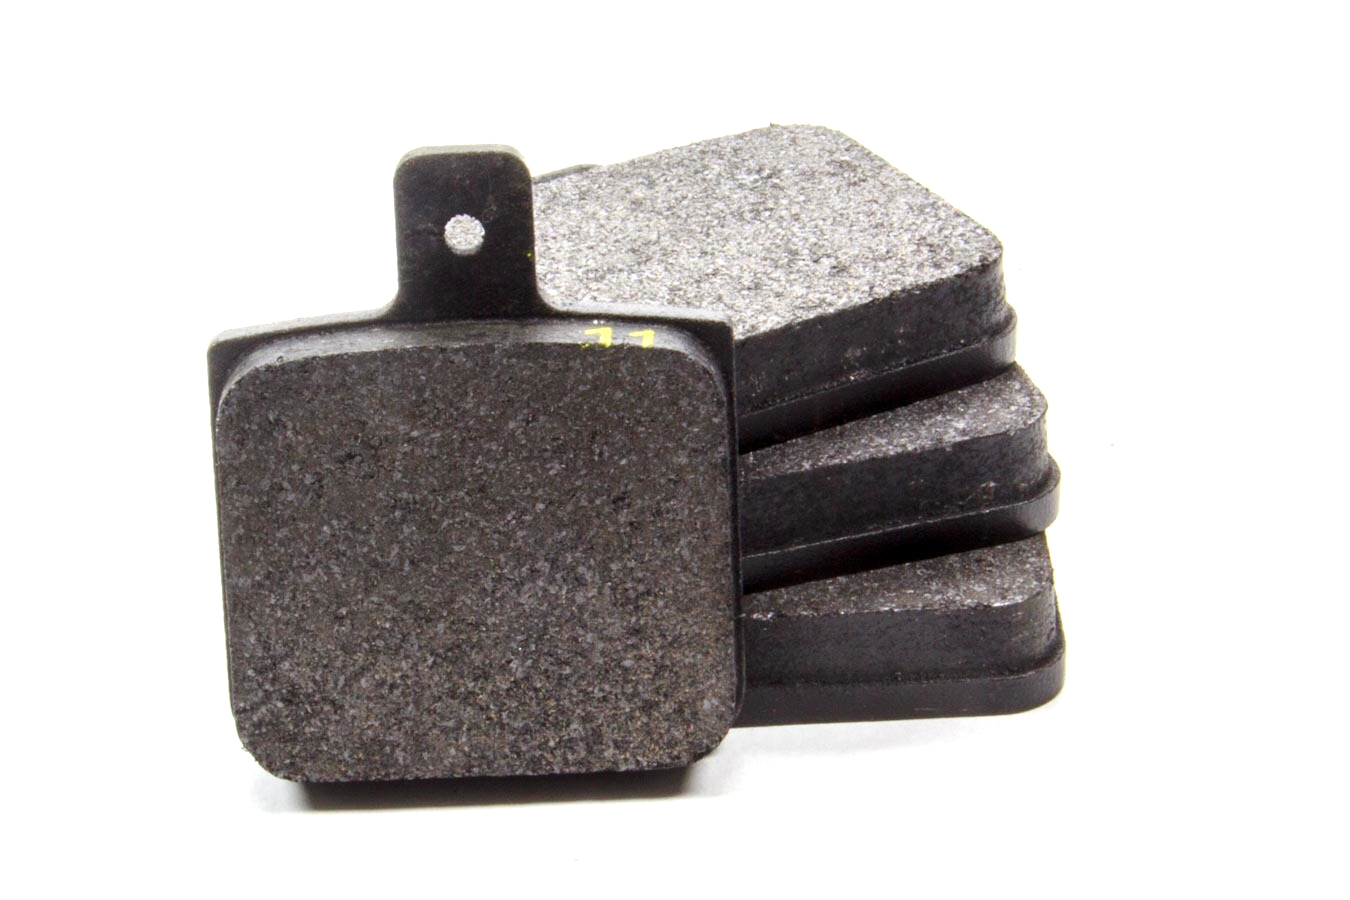 PFC Brakes 7757.11.12.44 Brake Pads, 11 Compound, All Temperatures, Wilwood Dynalite Calipers, Set of 4